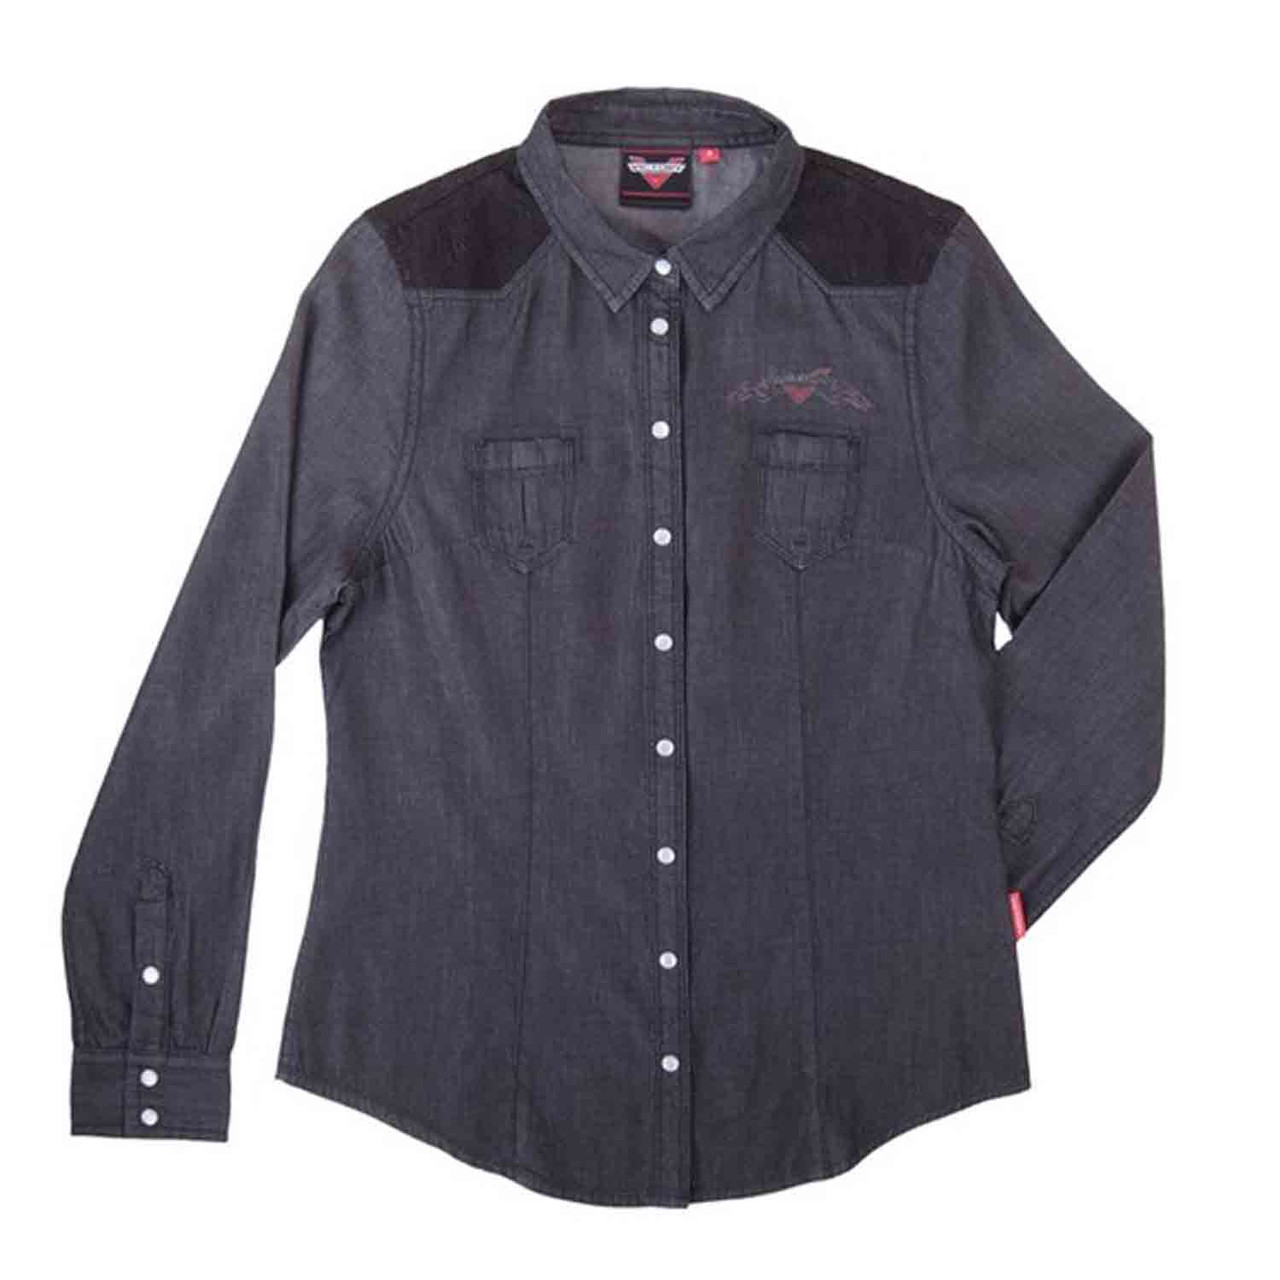 Victory Motorcycle New OEM Women's Black Chambray Shirt, 2X-Large, 286439712